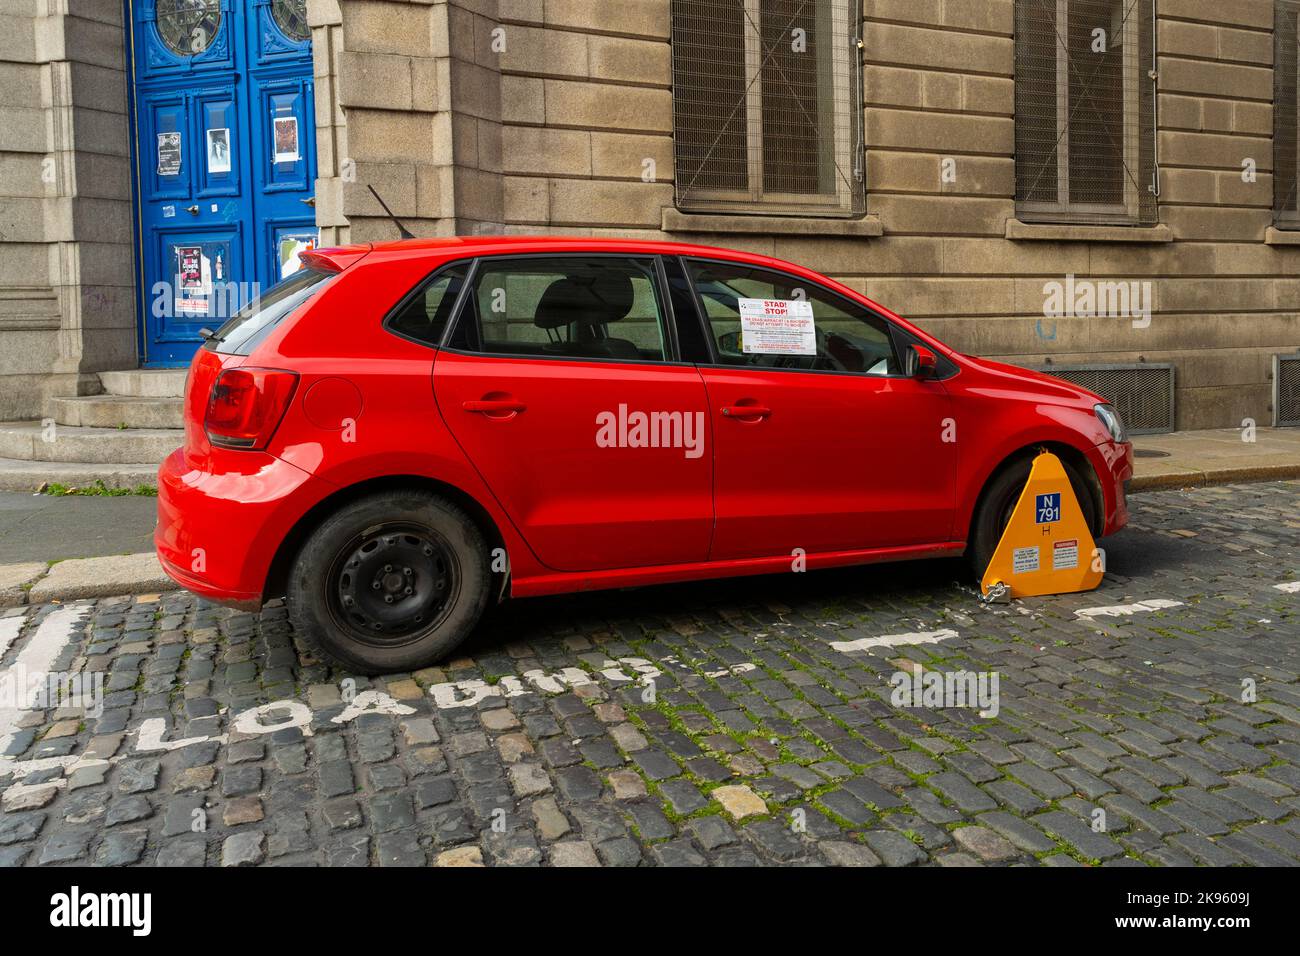 Republic of Ireland Eire Dublin City Council street scene red car clamped yellow wheel clamp in loading bay with warning sticker in English & Gaelic Stock Photo